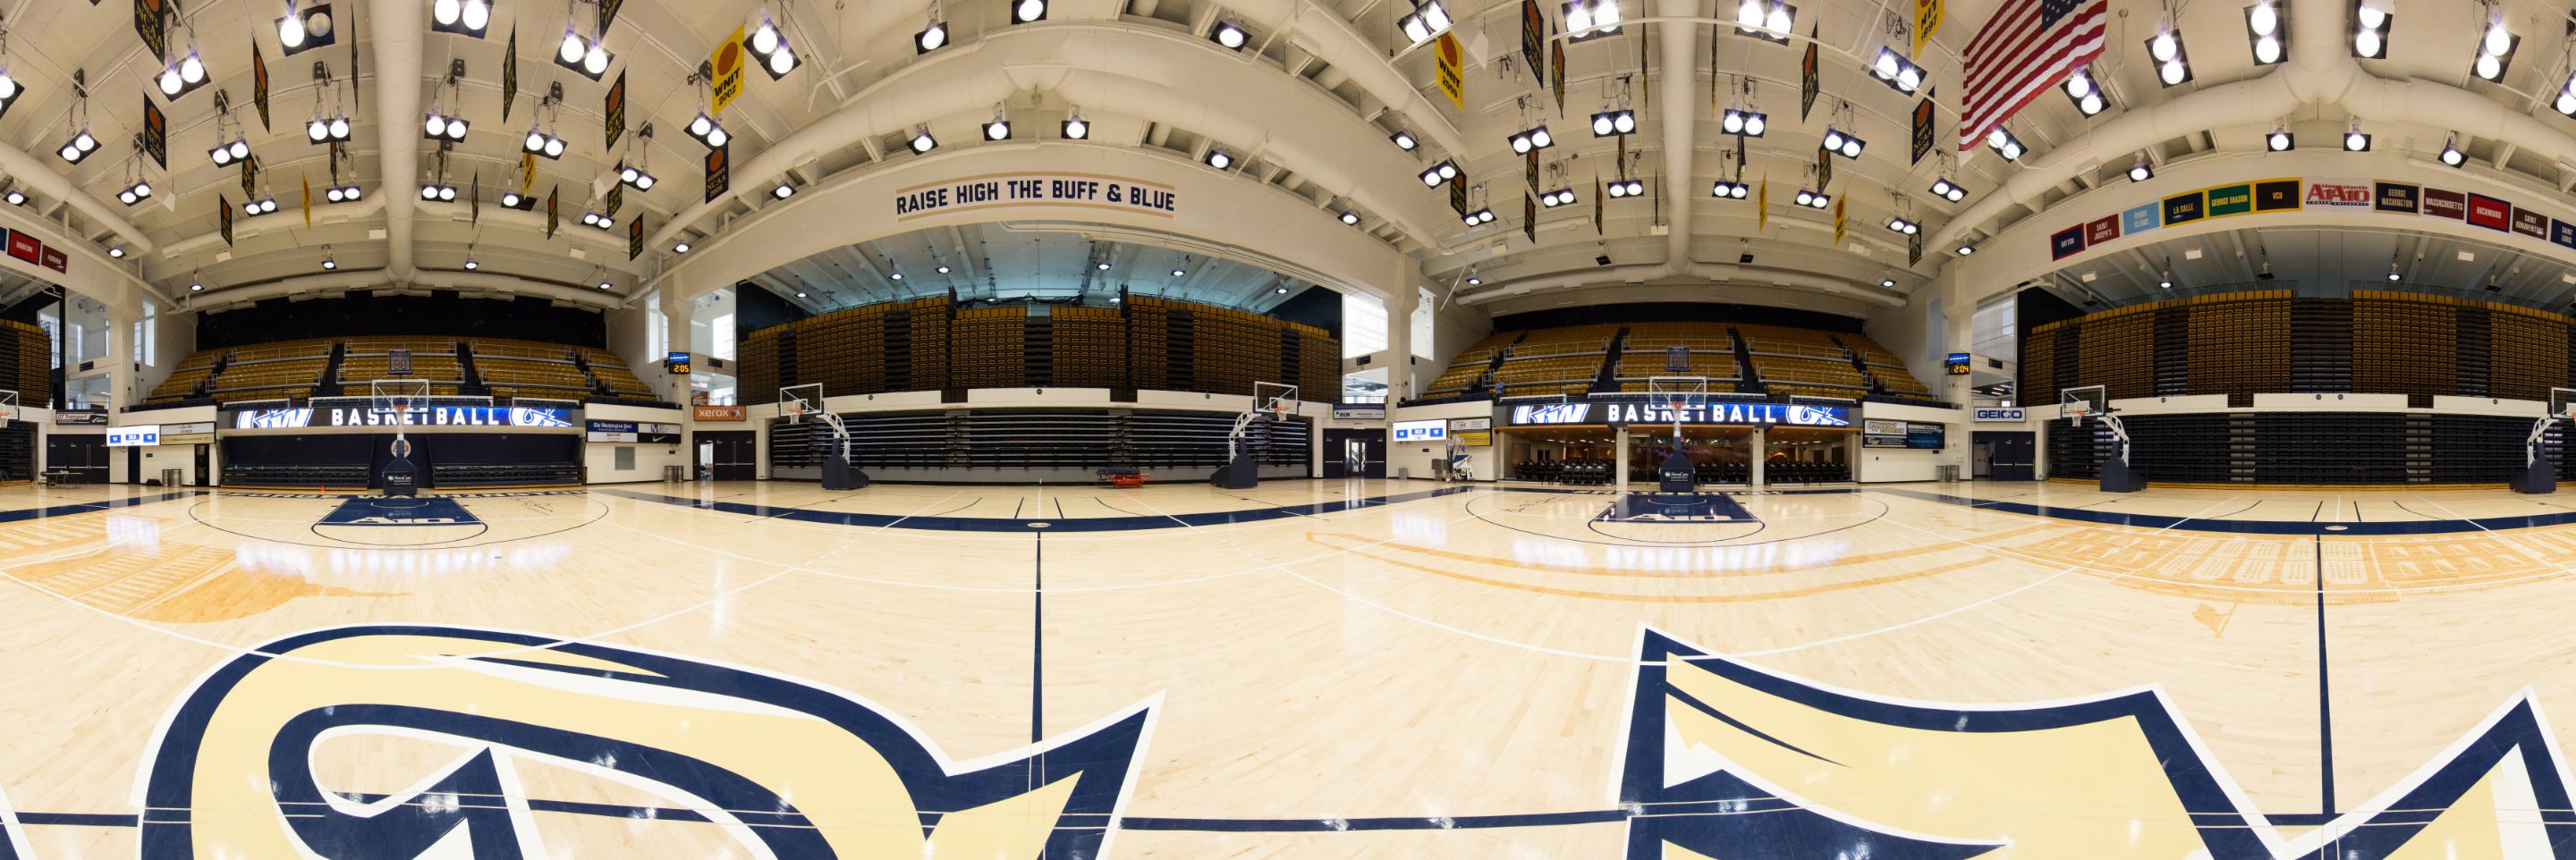 A panoramic view of the basketball court and stands inside the Smith Center.